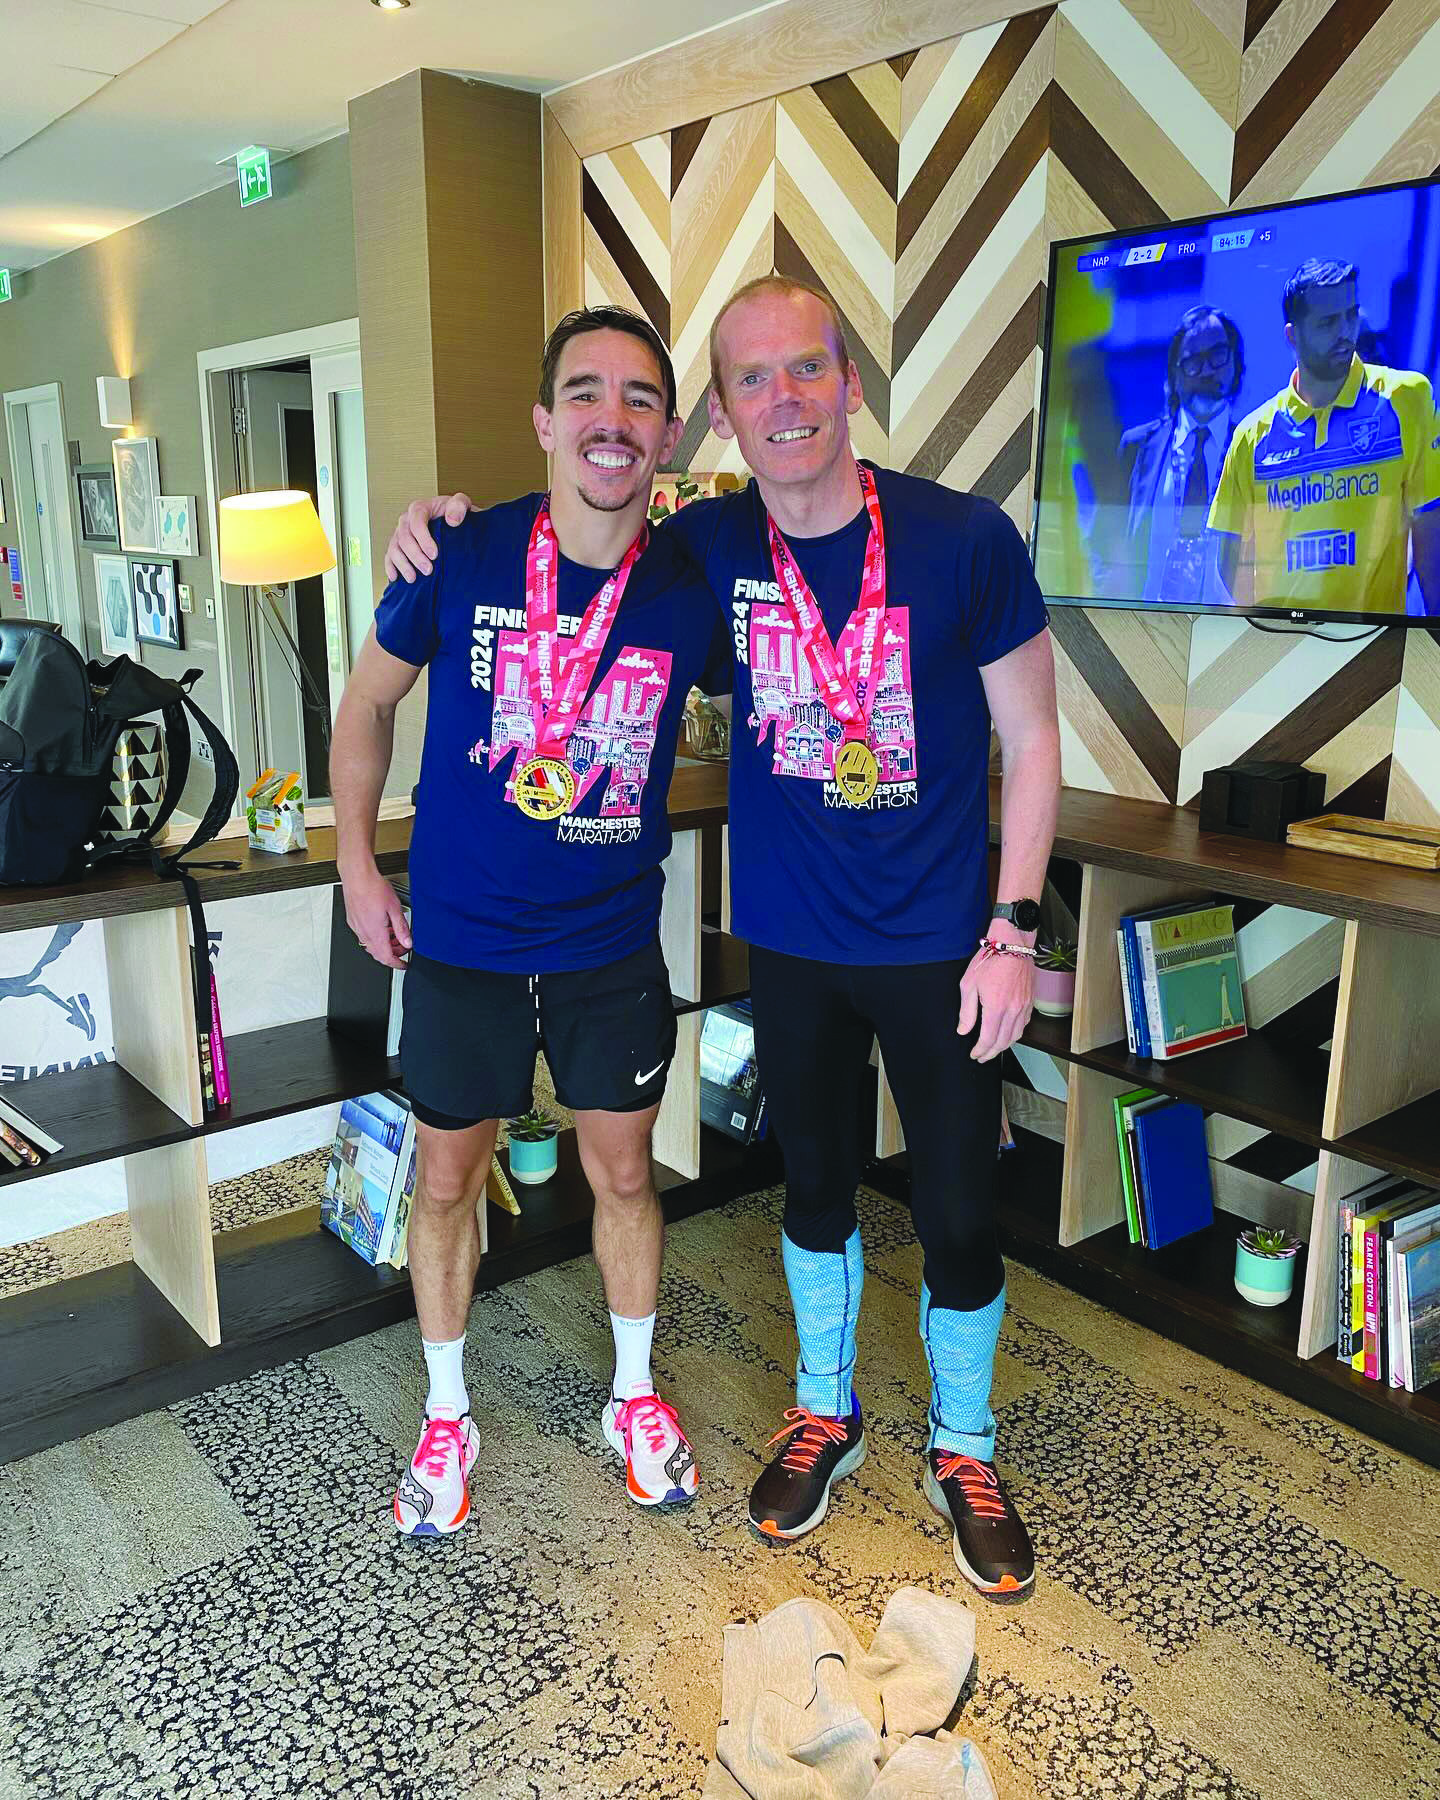 Michael Conlan with his running coach, Noel McNally after Sunday’s Manchester Marathon